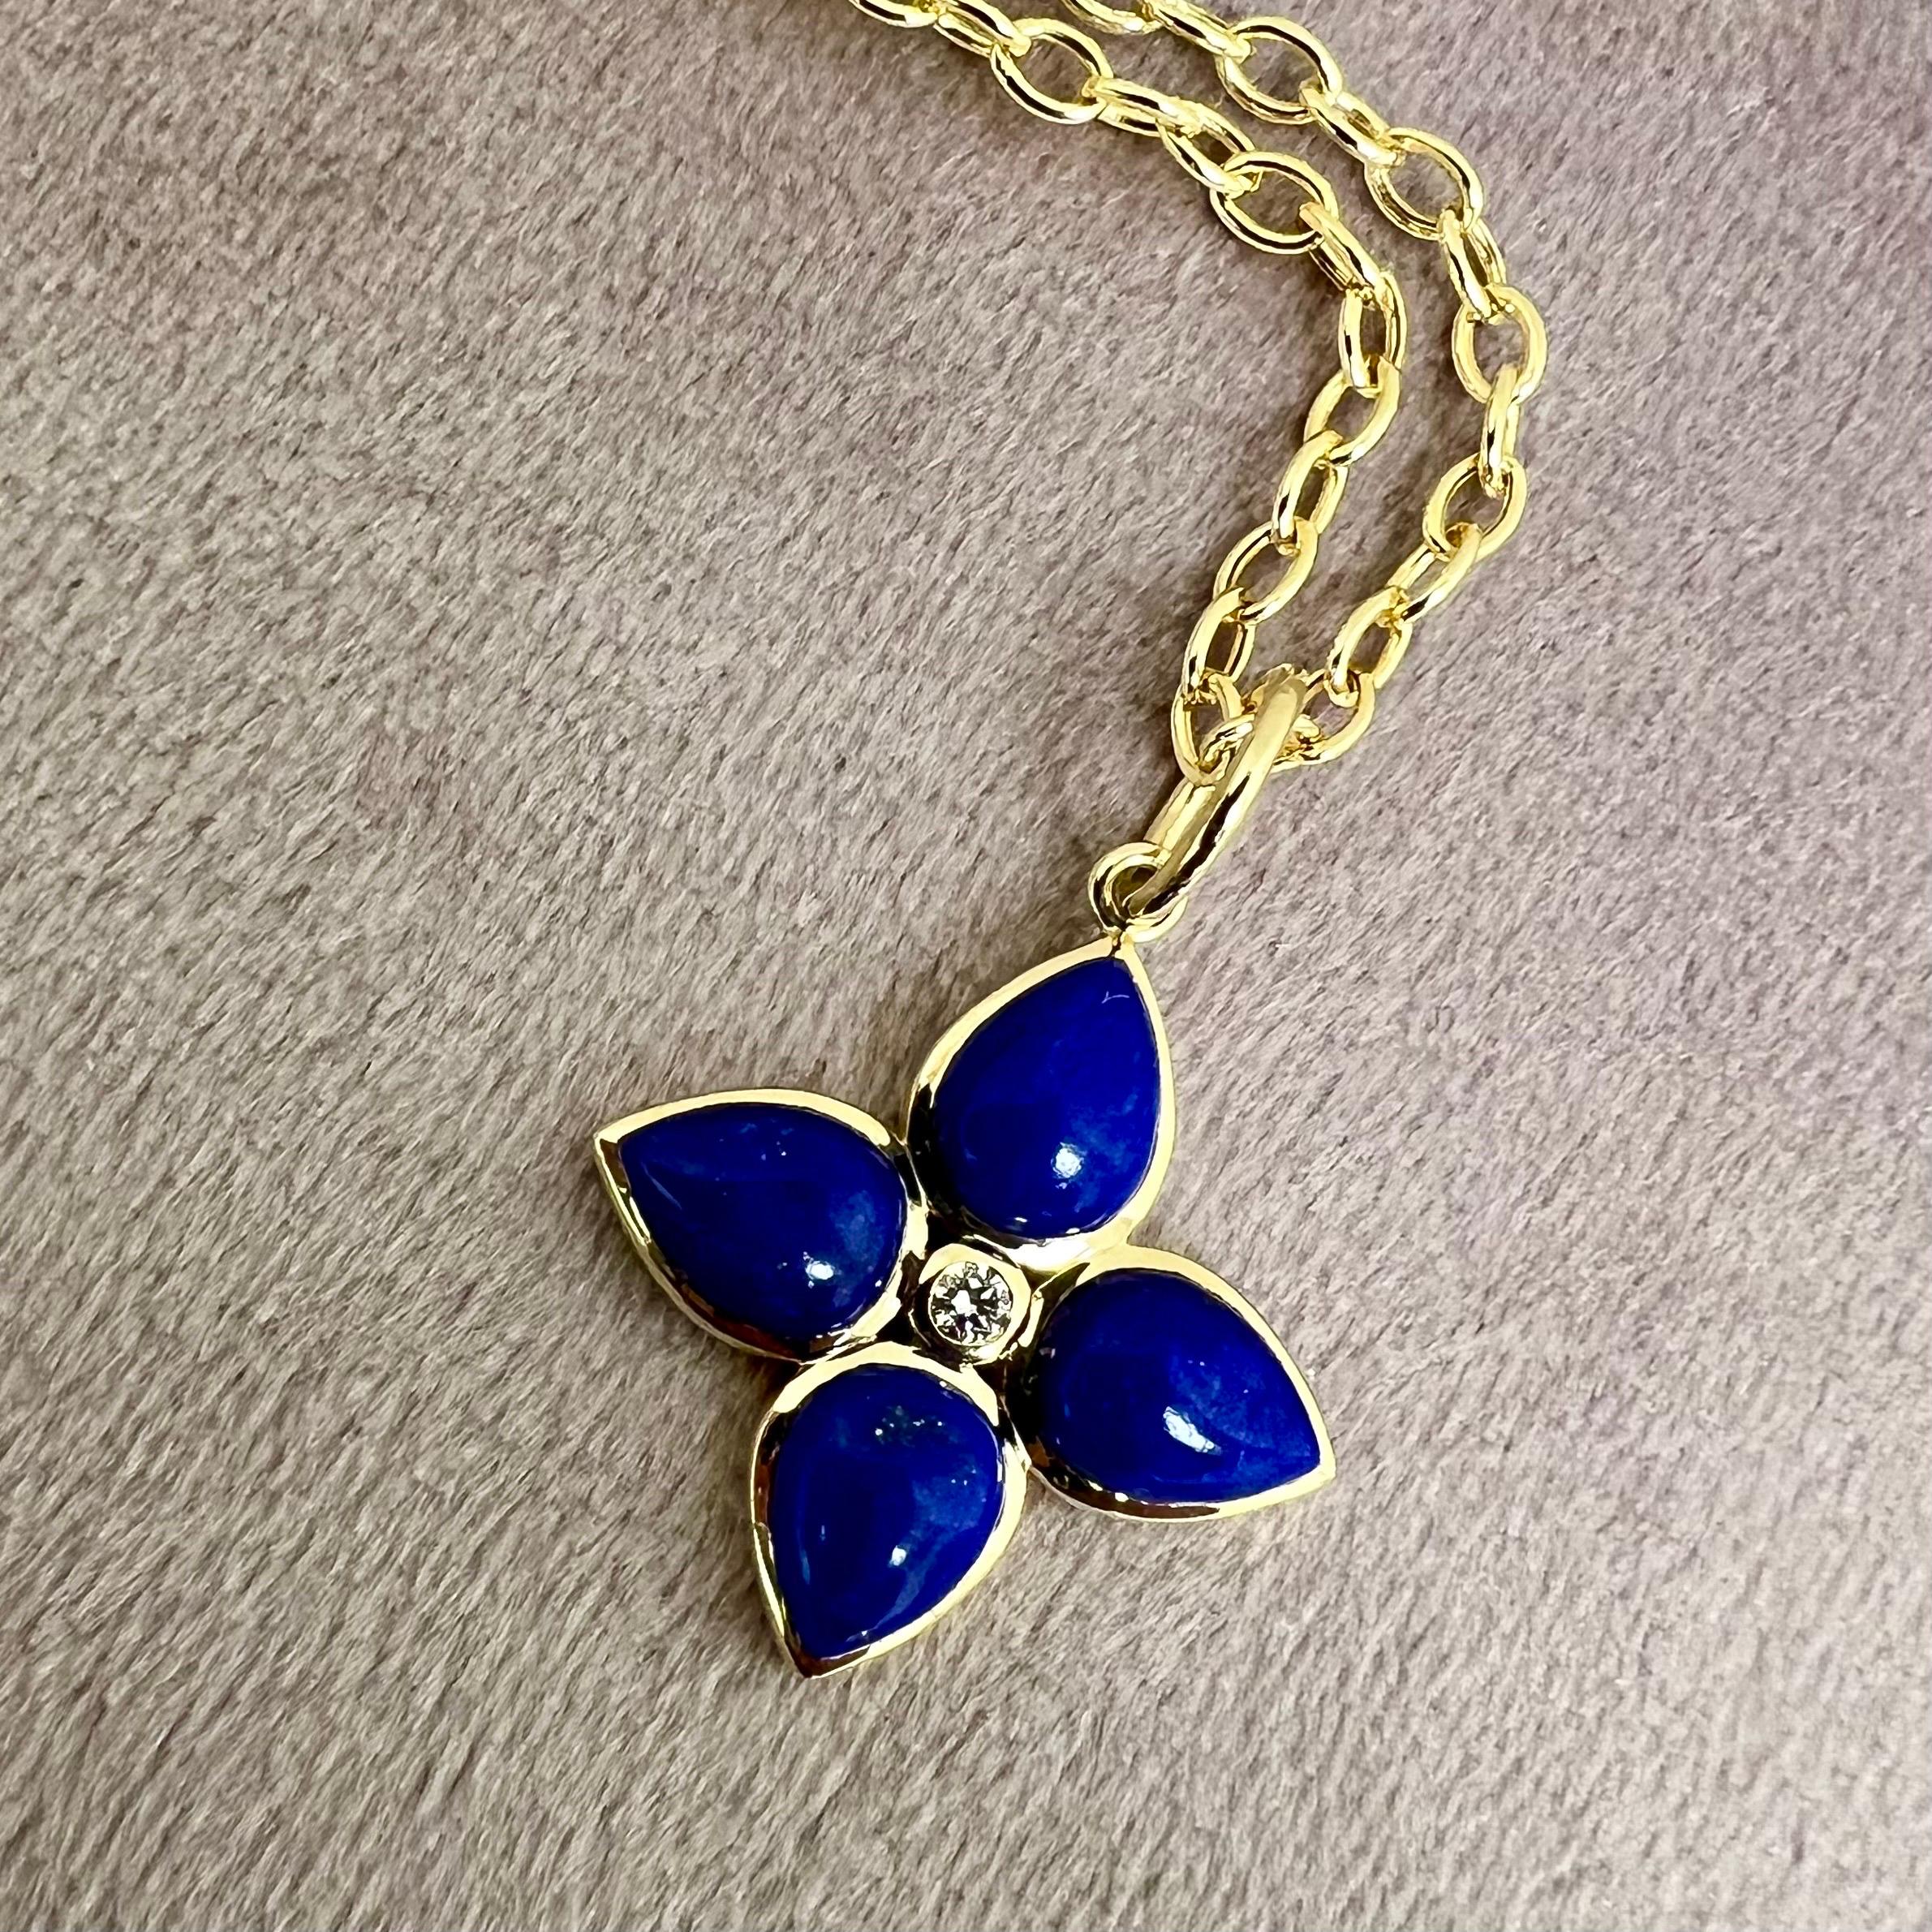 Created in 18 karat yellow gold
Lapis Lazuli 5 carats approx.
Diamonds 0.04 carat approx.
Chain sold separately

Exquisitely-sculpted from 18K yellow gold, the Pendant is expertly-crafted with a 5-carat lazuli lazuli and 0.04-carat diamonds,